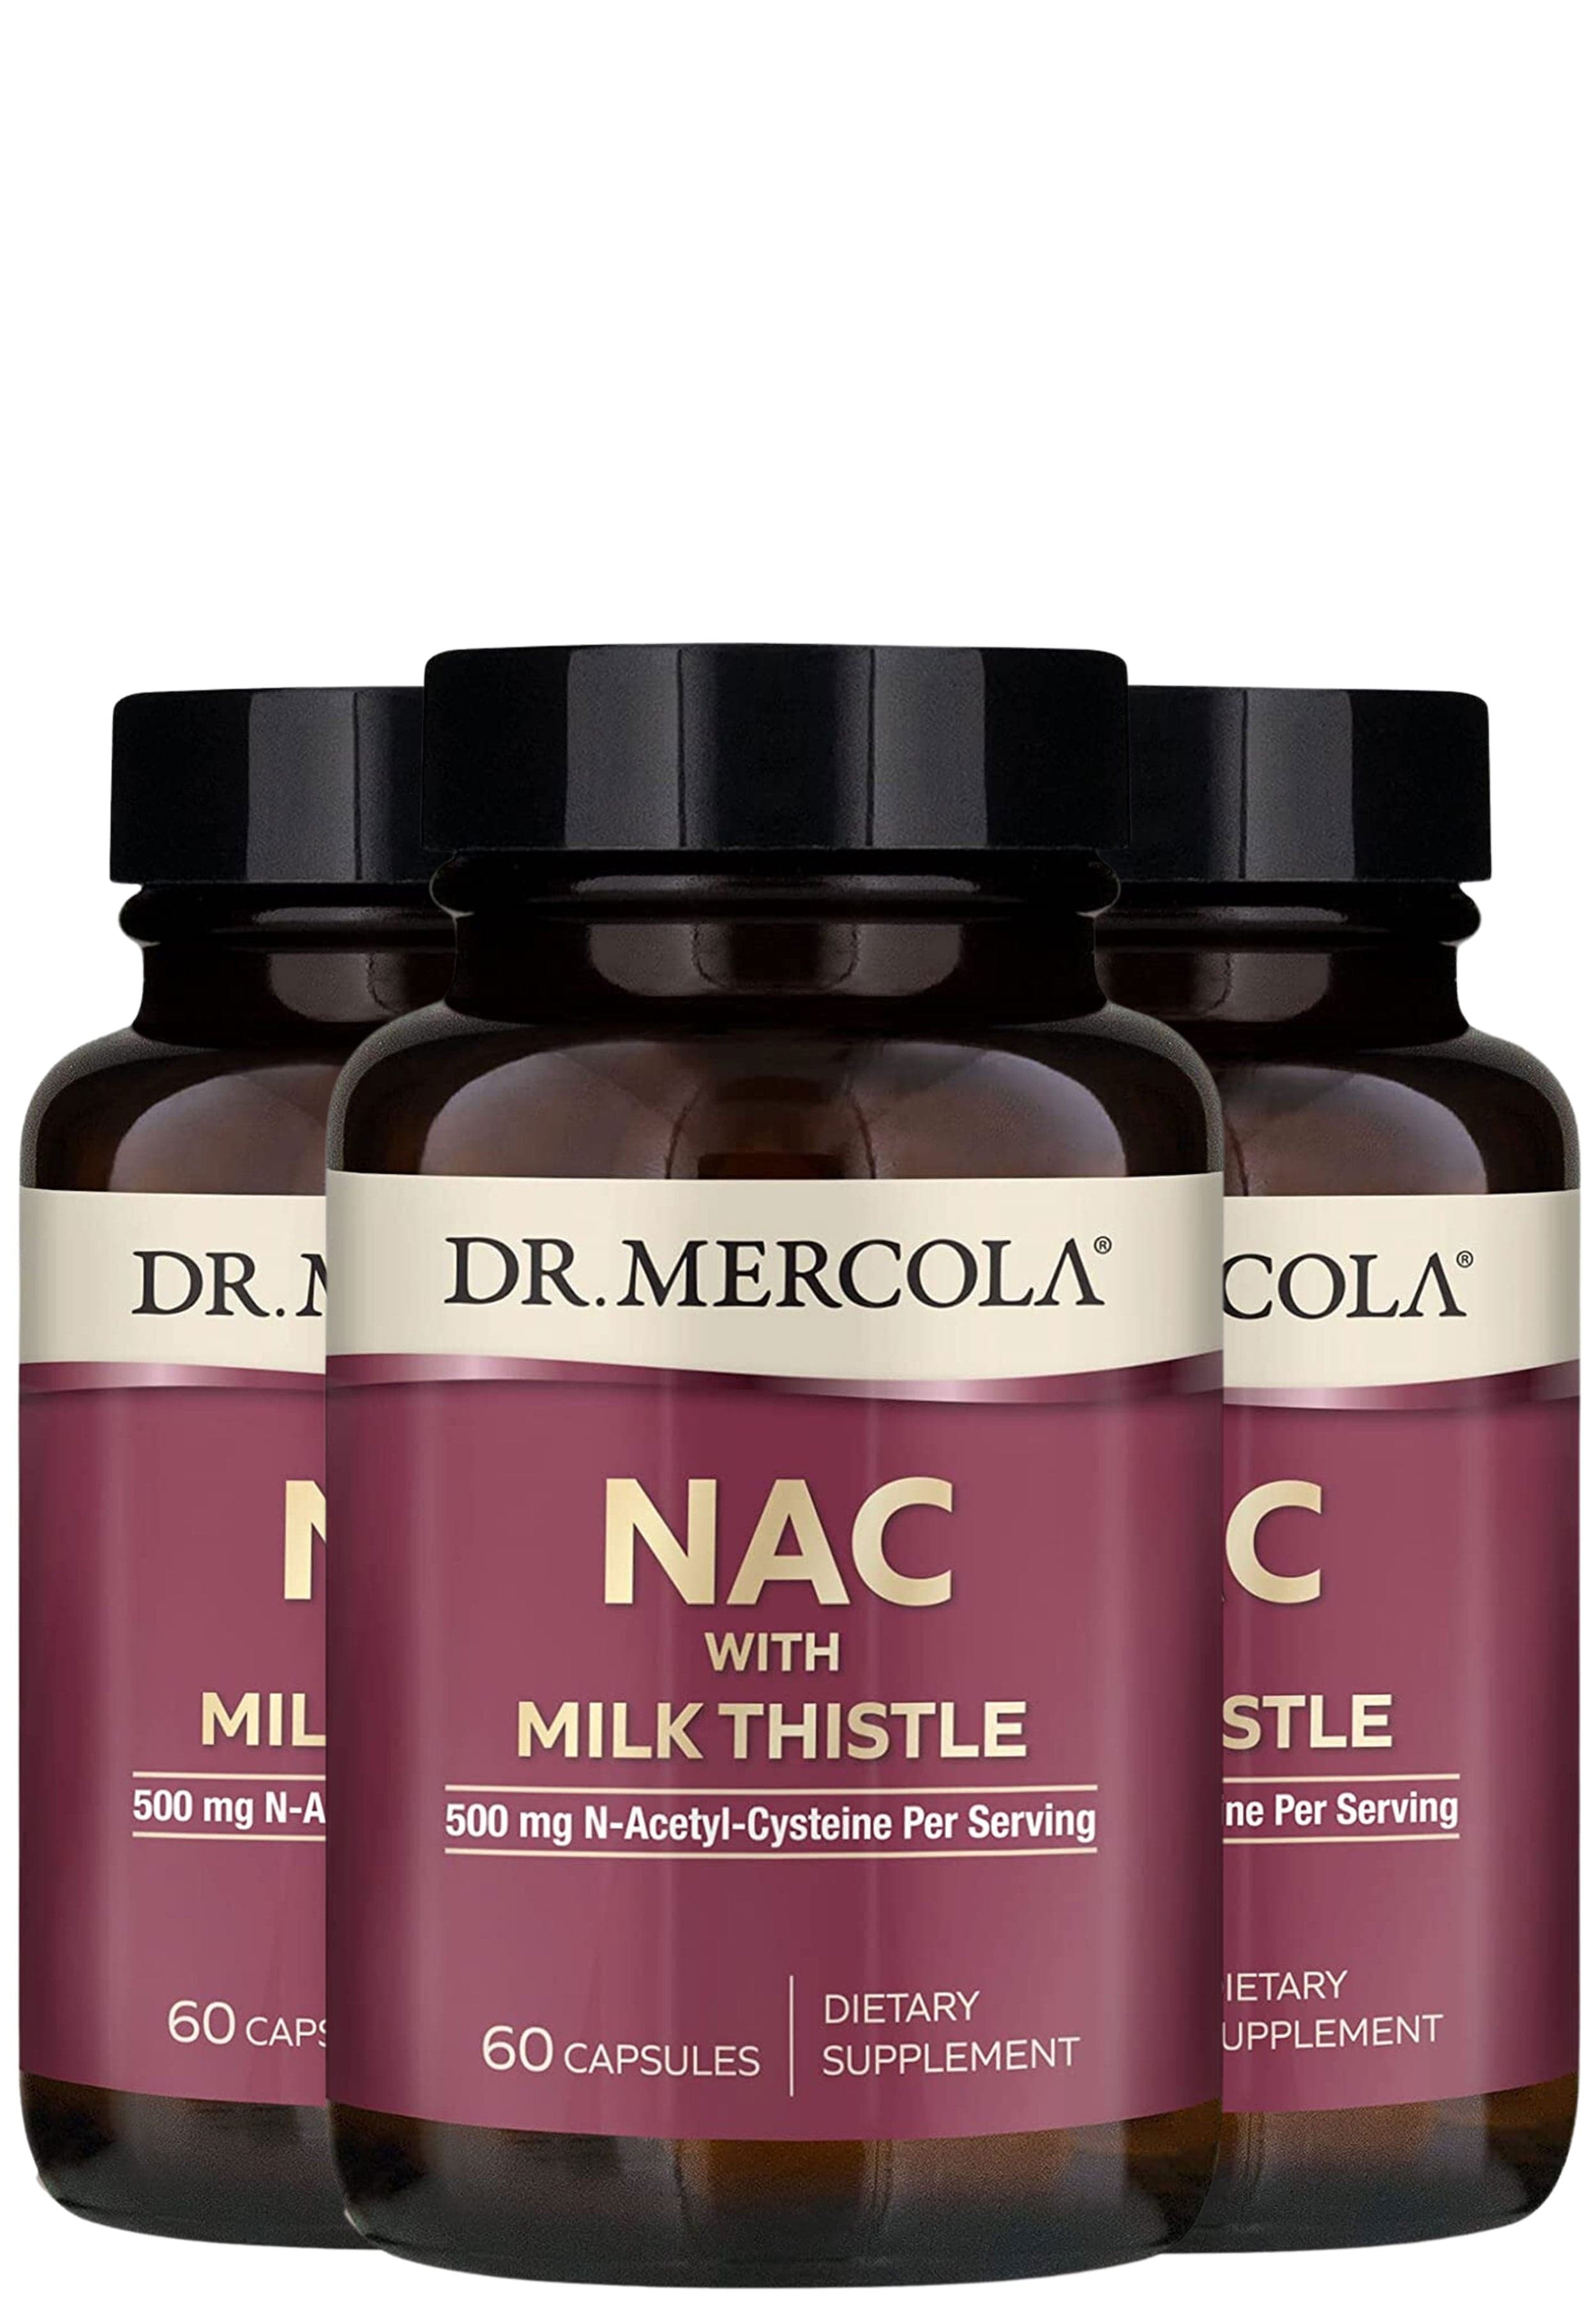 Dr. Mercola NAC with Milk Thistle (formerly Liver Support)